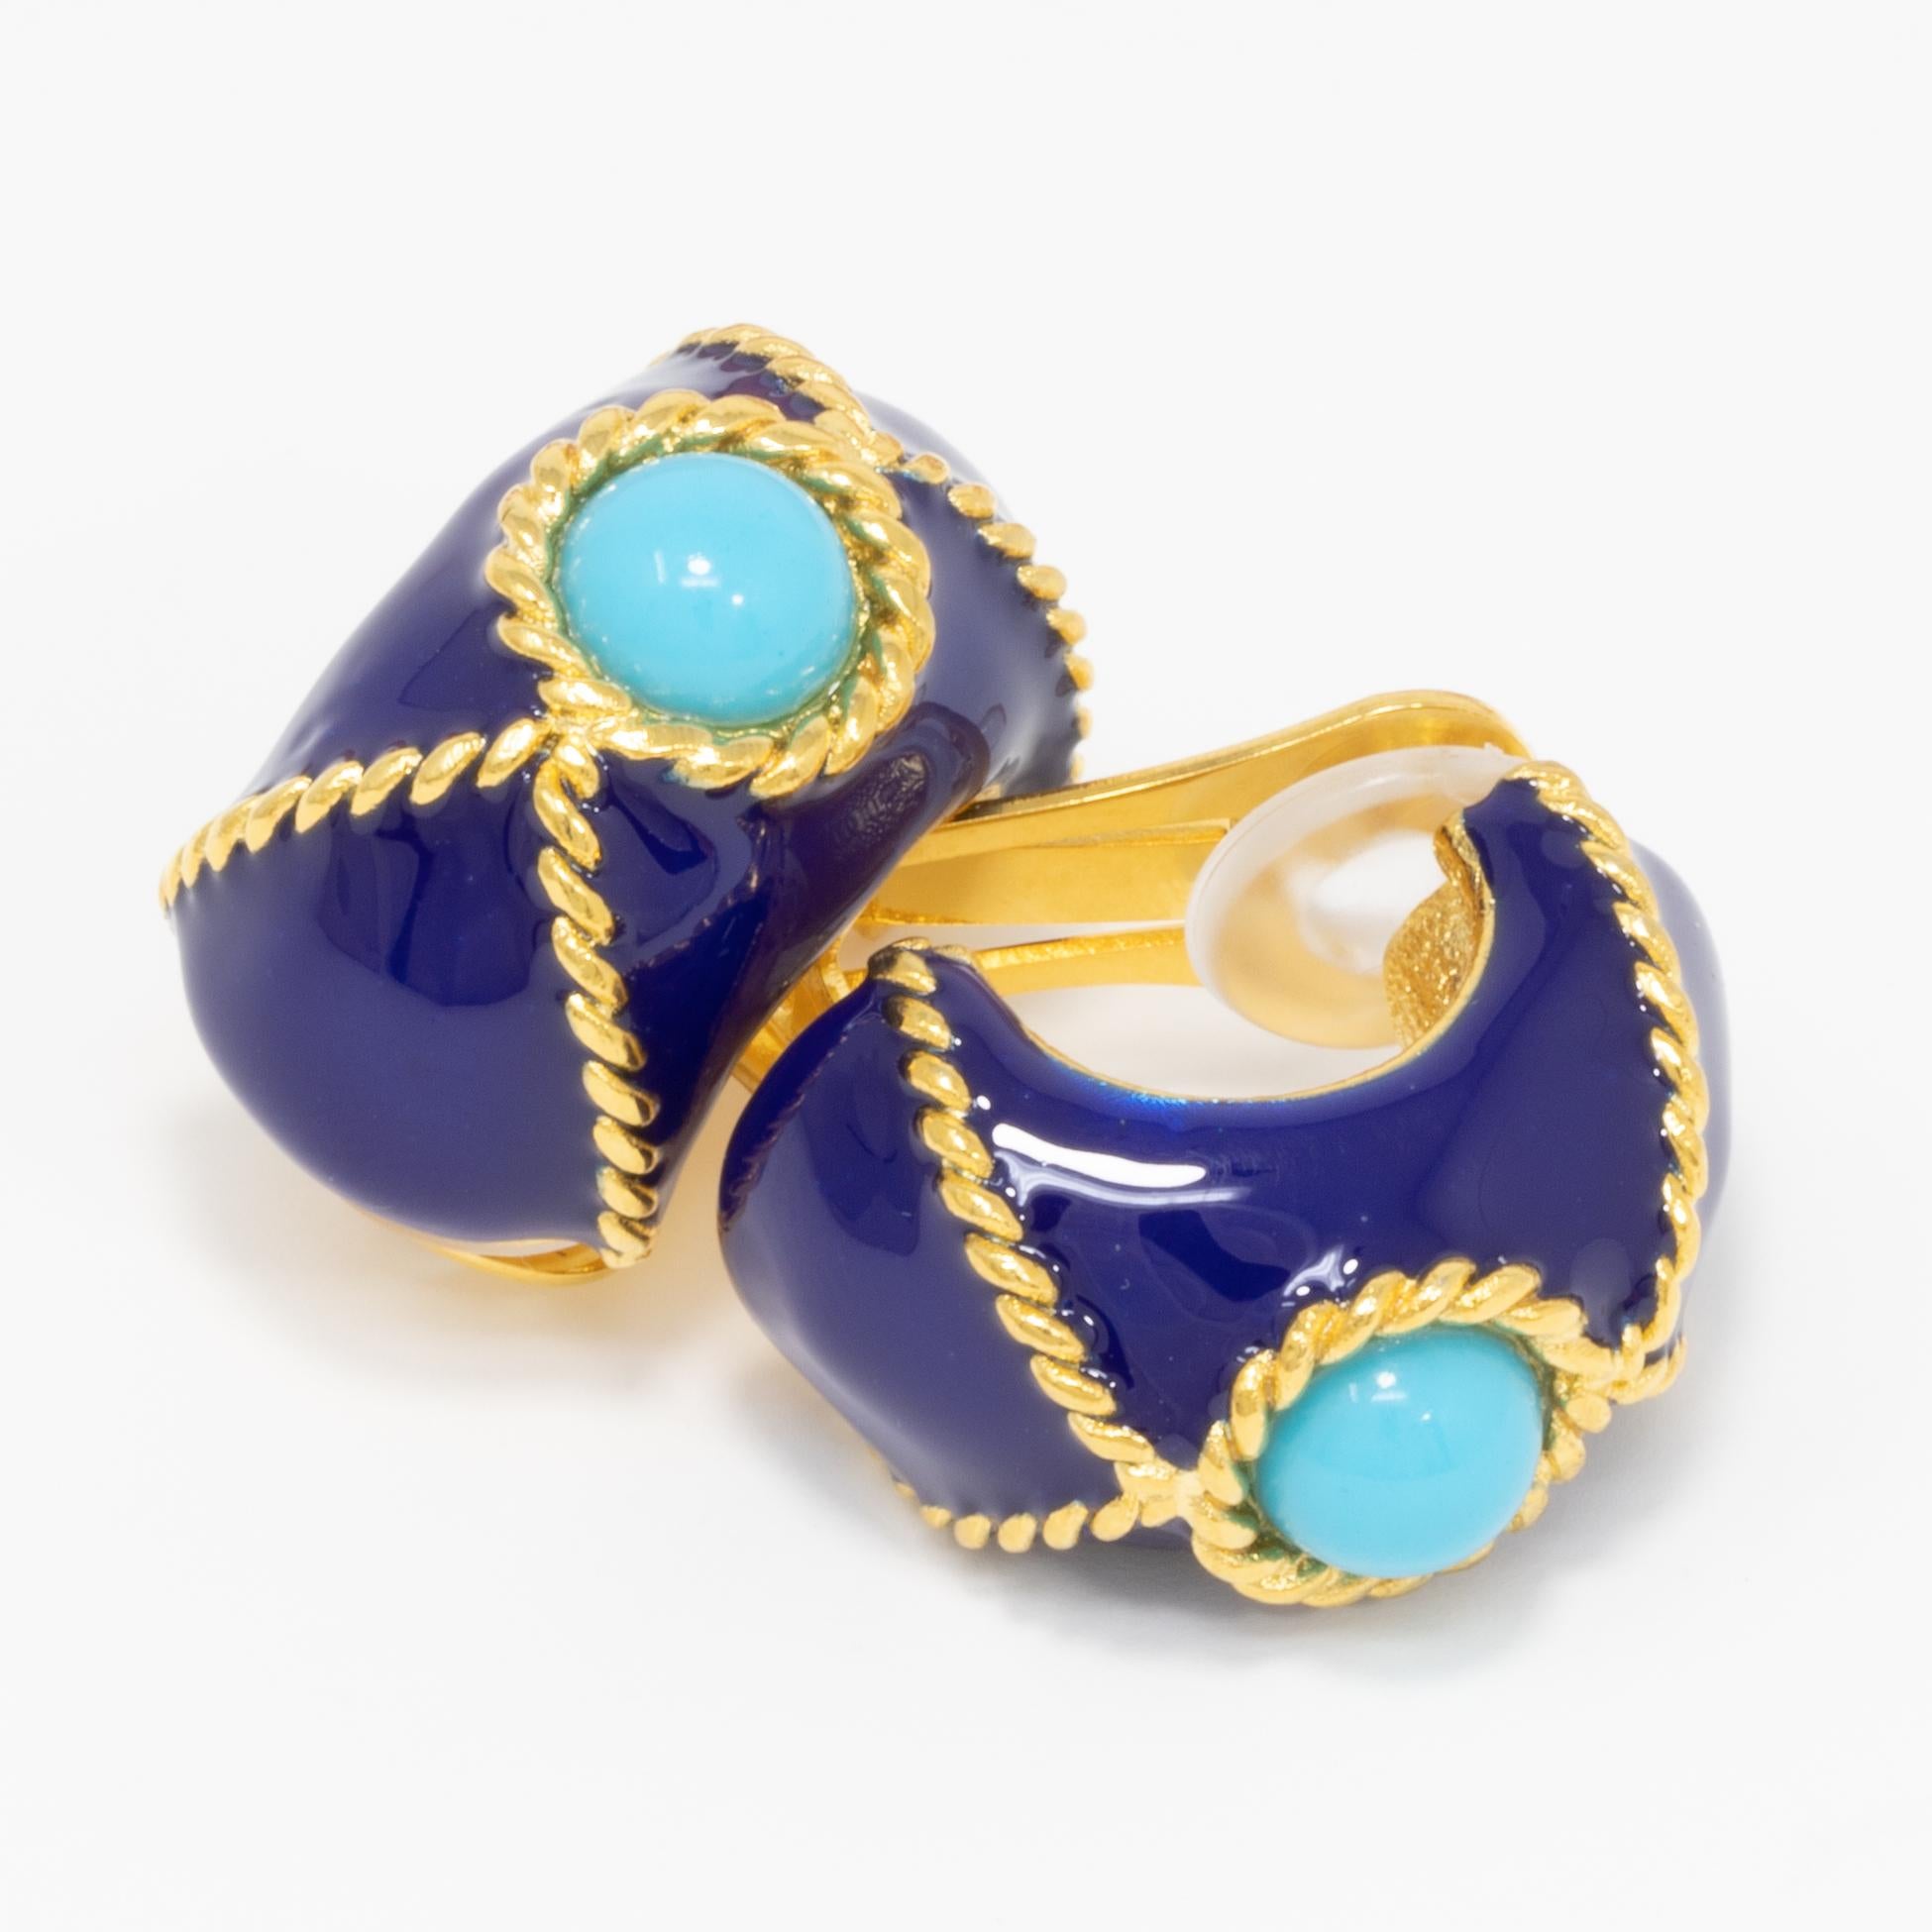 A pair of clip on earrings by Kenneth Jay Lane. Each gold-plated earrings is painted in blue, and decorated with a turquoise cabochon centerpiece and gold accents.

Tags, Marks, Hallmarks: KJL, Made in USA